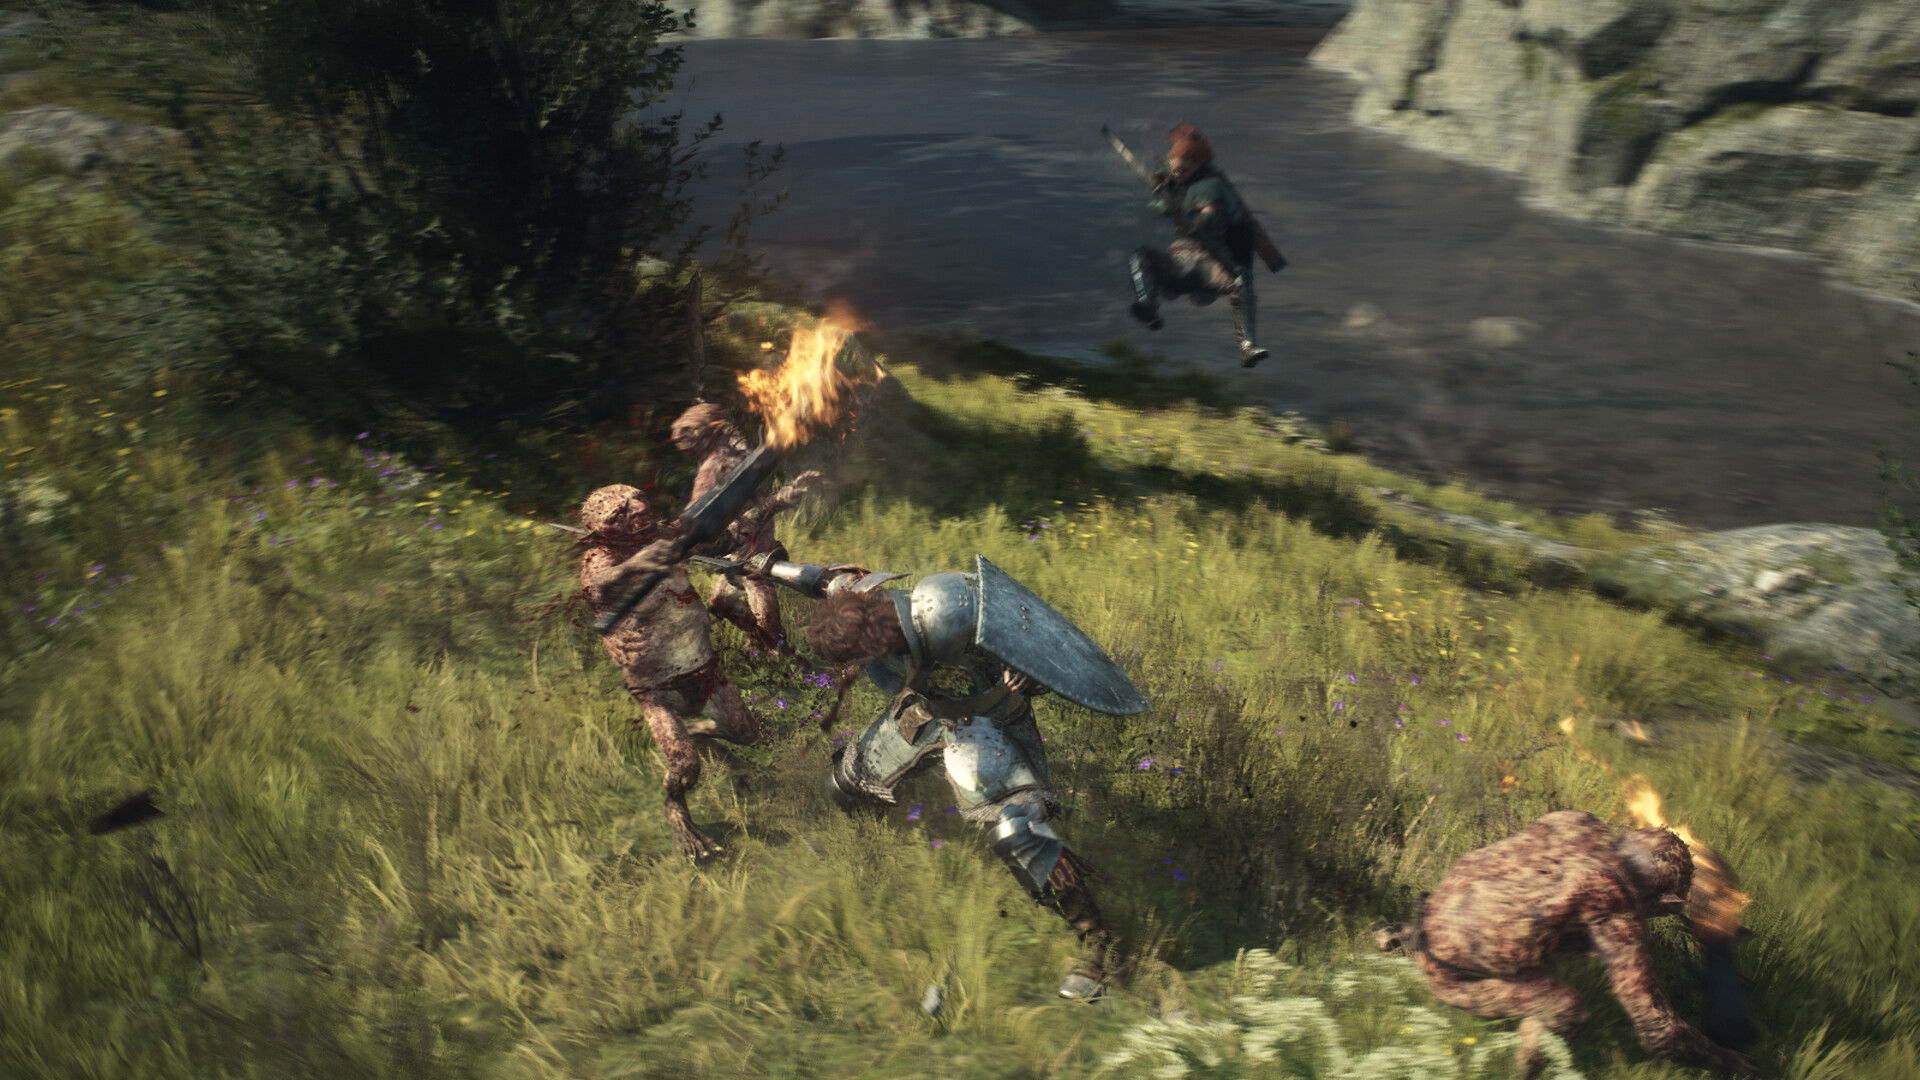 Dragon's Dogma 2 gets release date, new gameplay details from